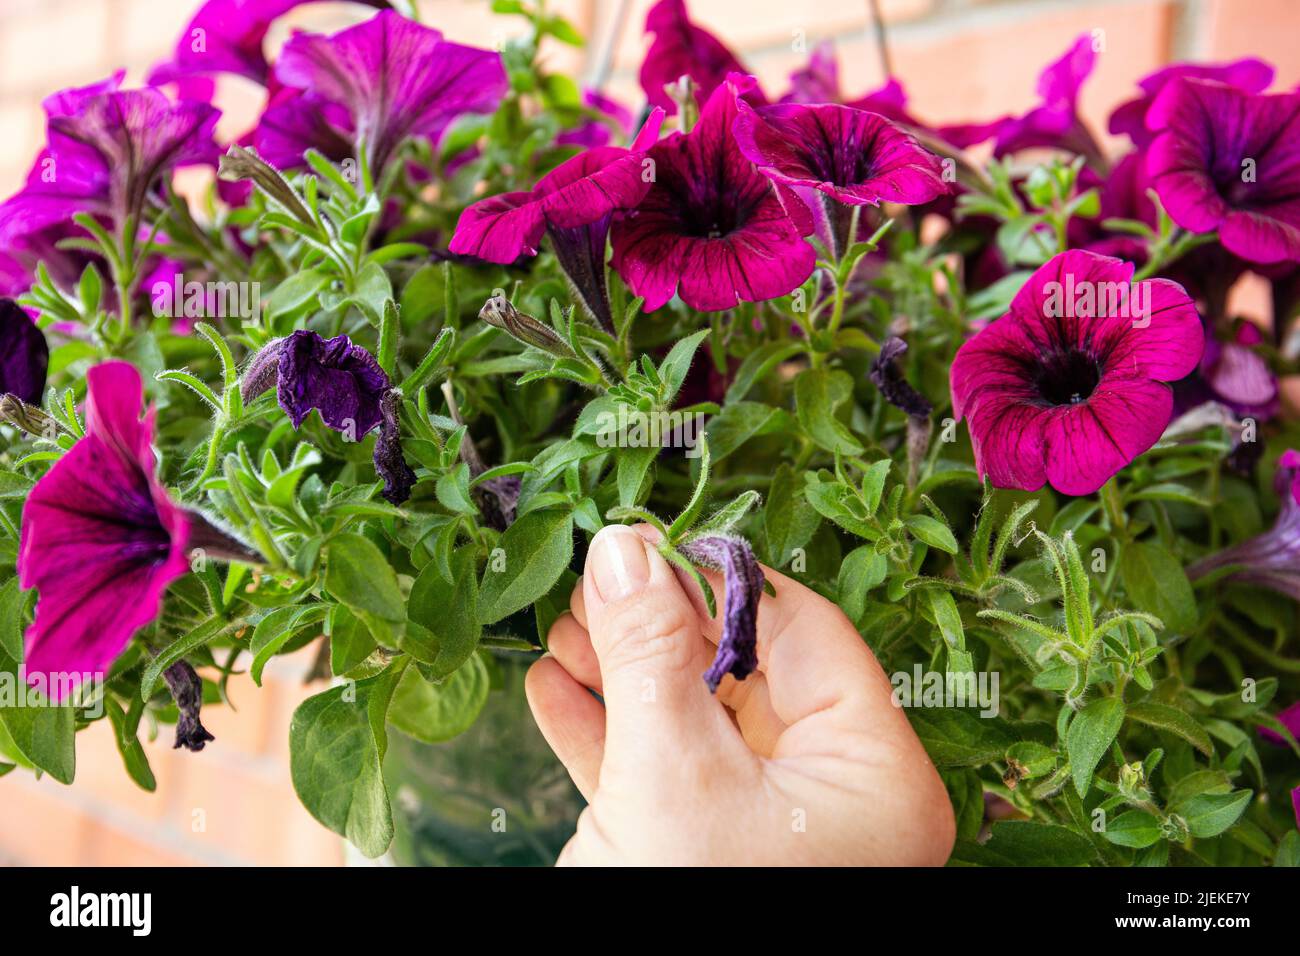 Pinch or cut away limp petunia flowers before they start seeding to encourage regrowth. Gardening hack concept. Stock Photo